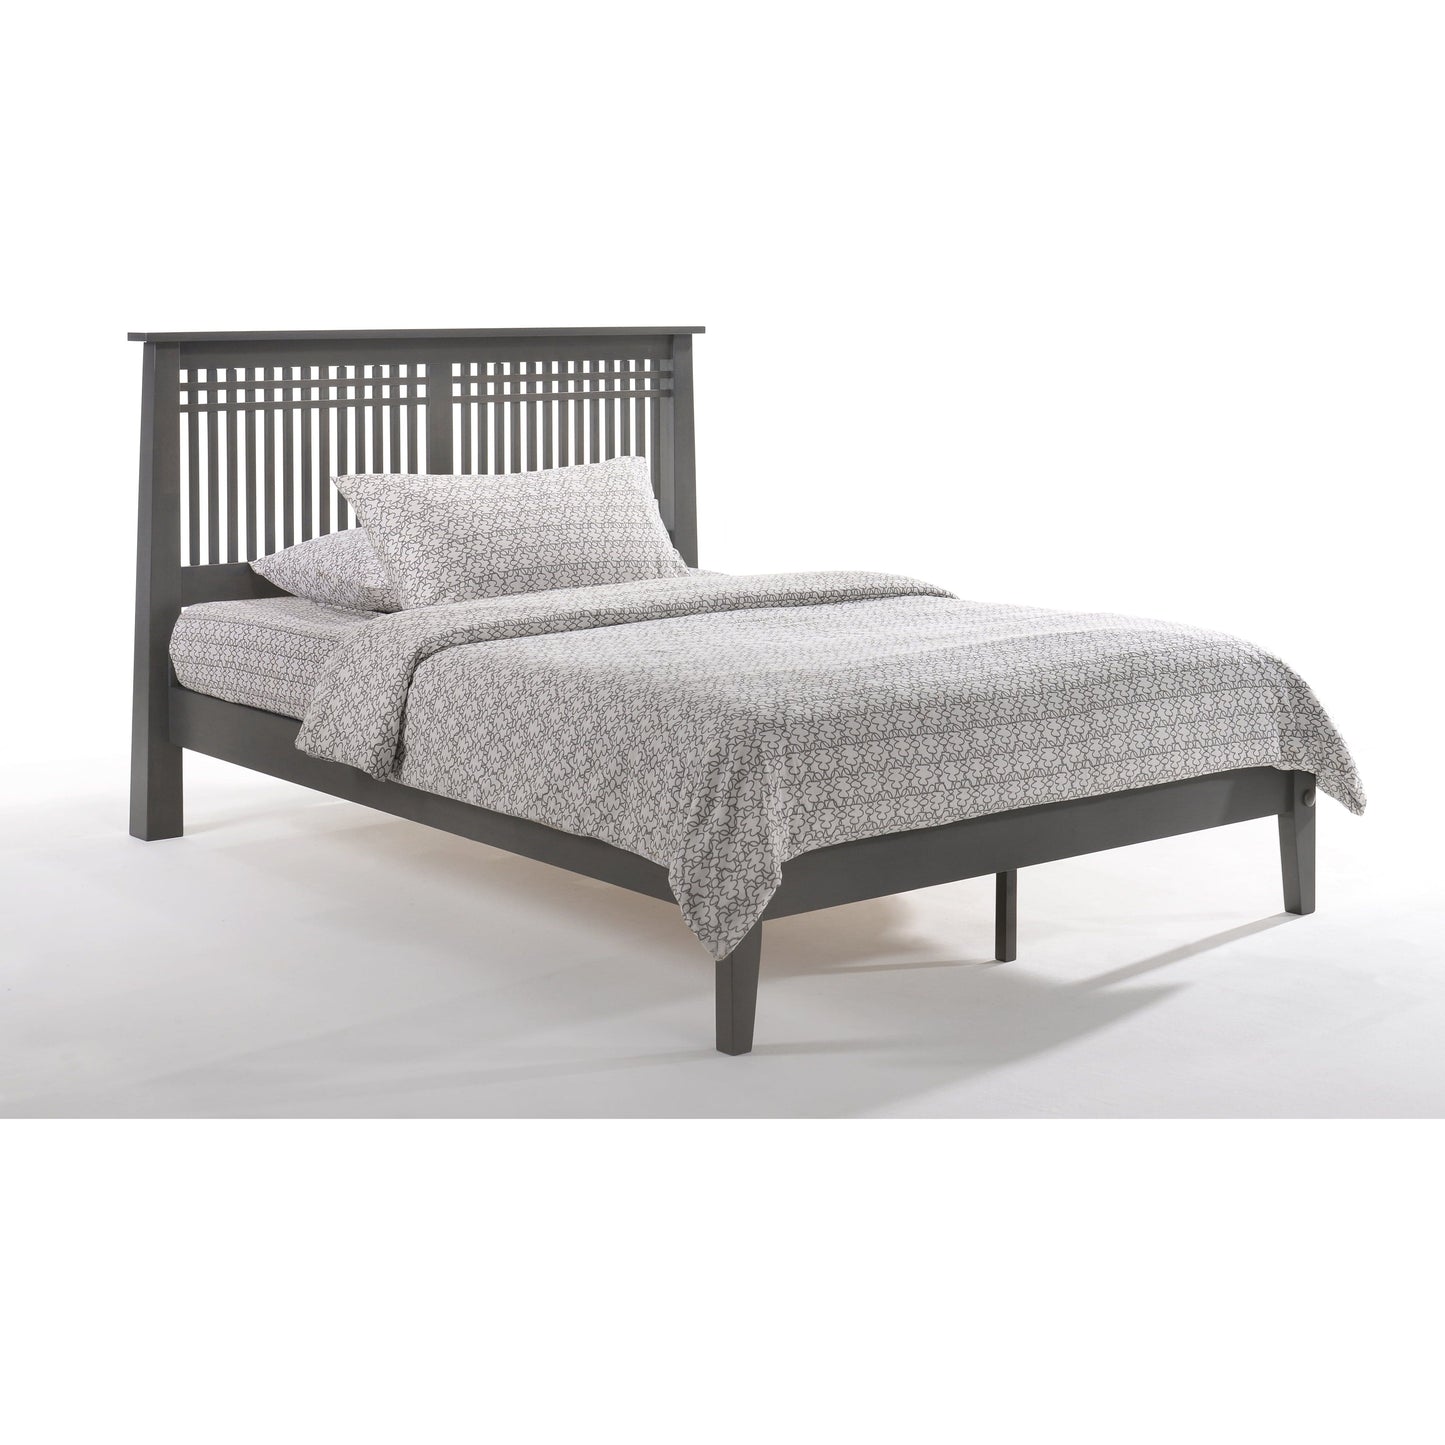 Night And Day Full Solstice Bed in cherry finish (P Series) SOL-PH-FUL-CH-COM